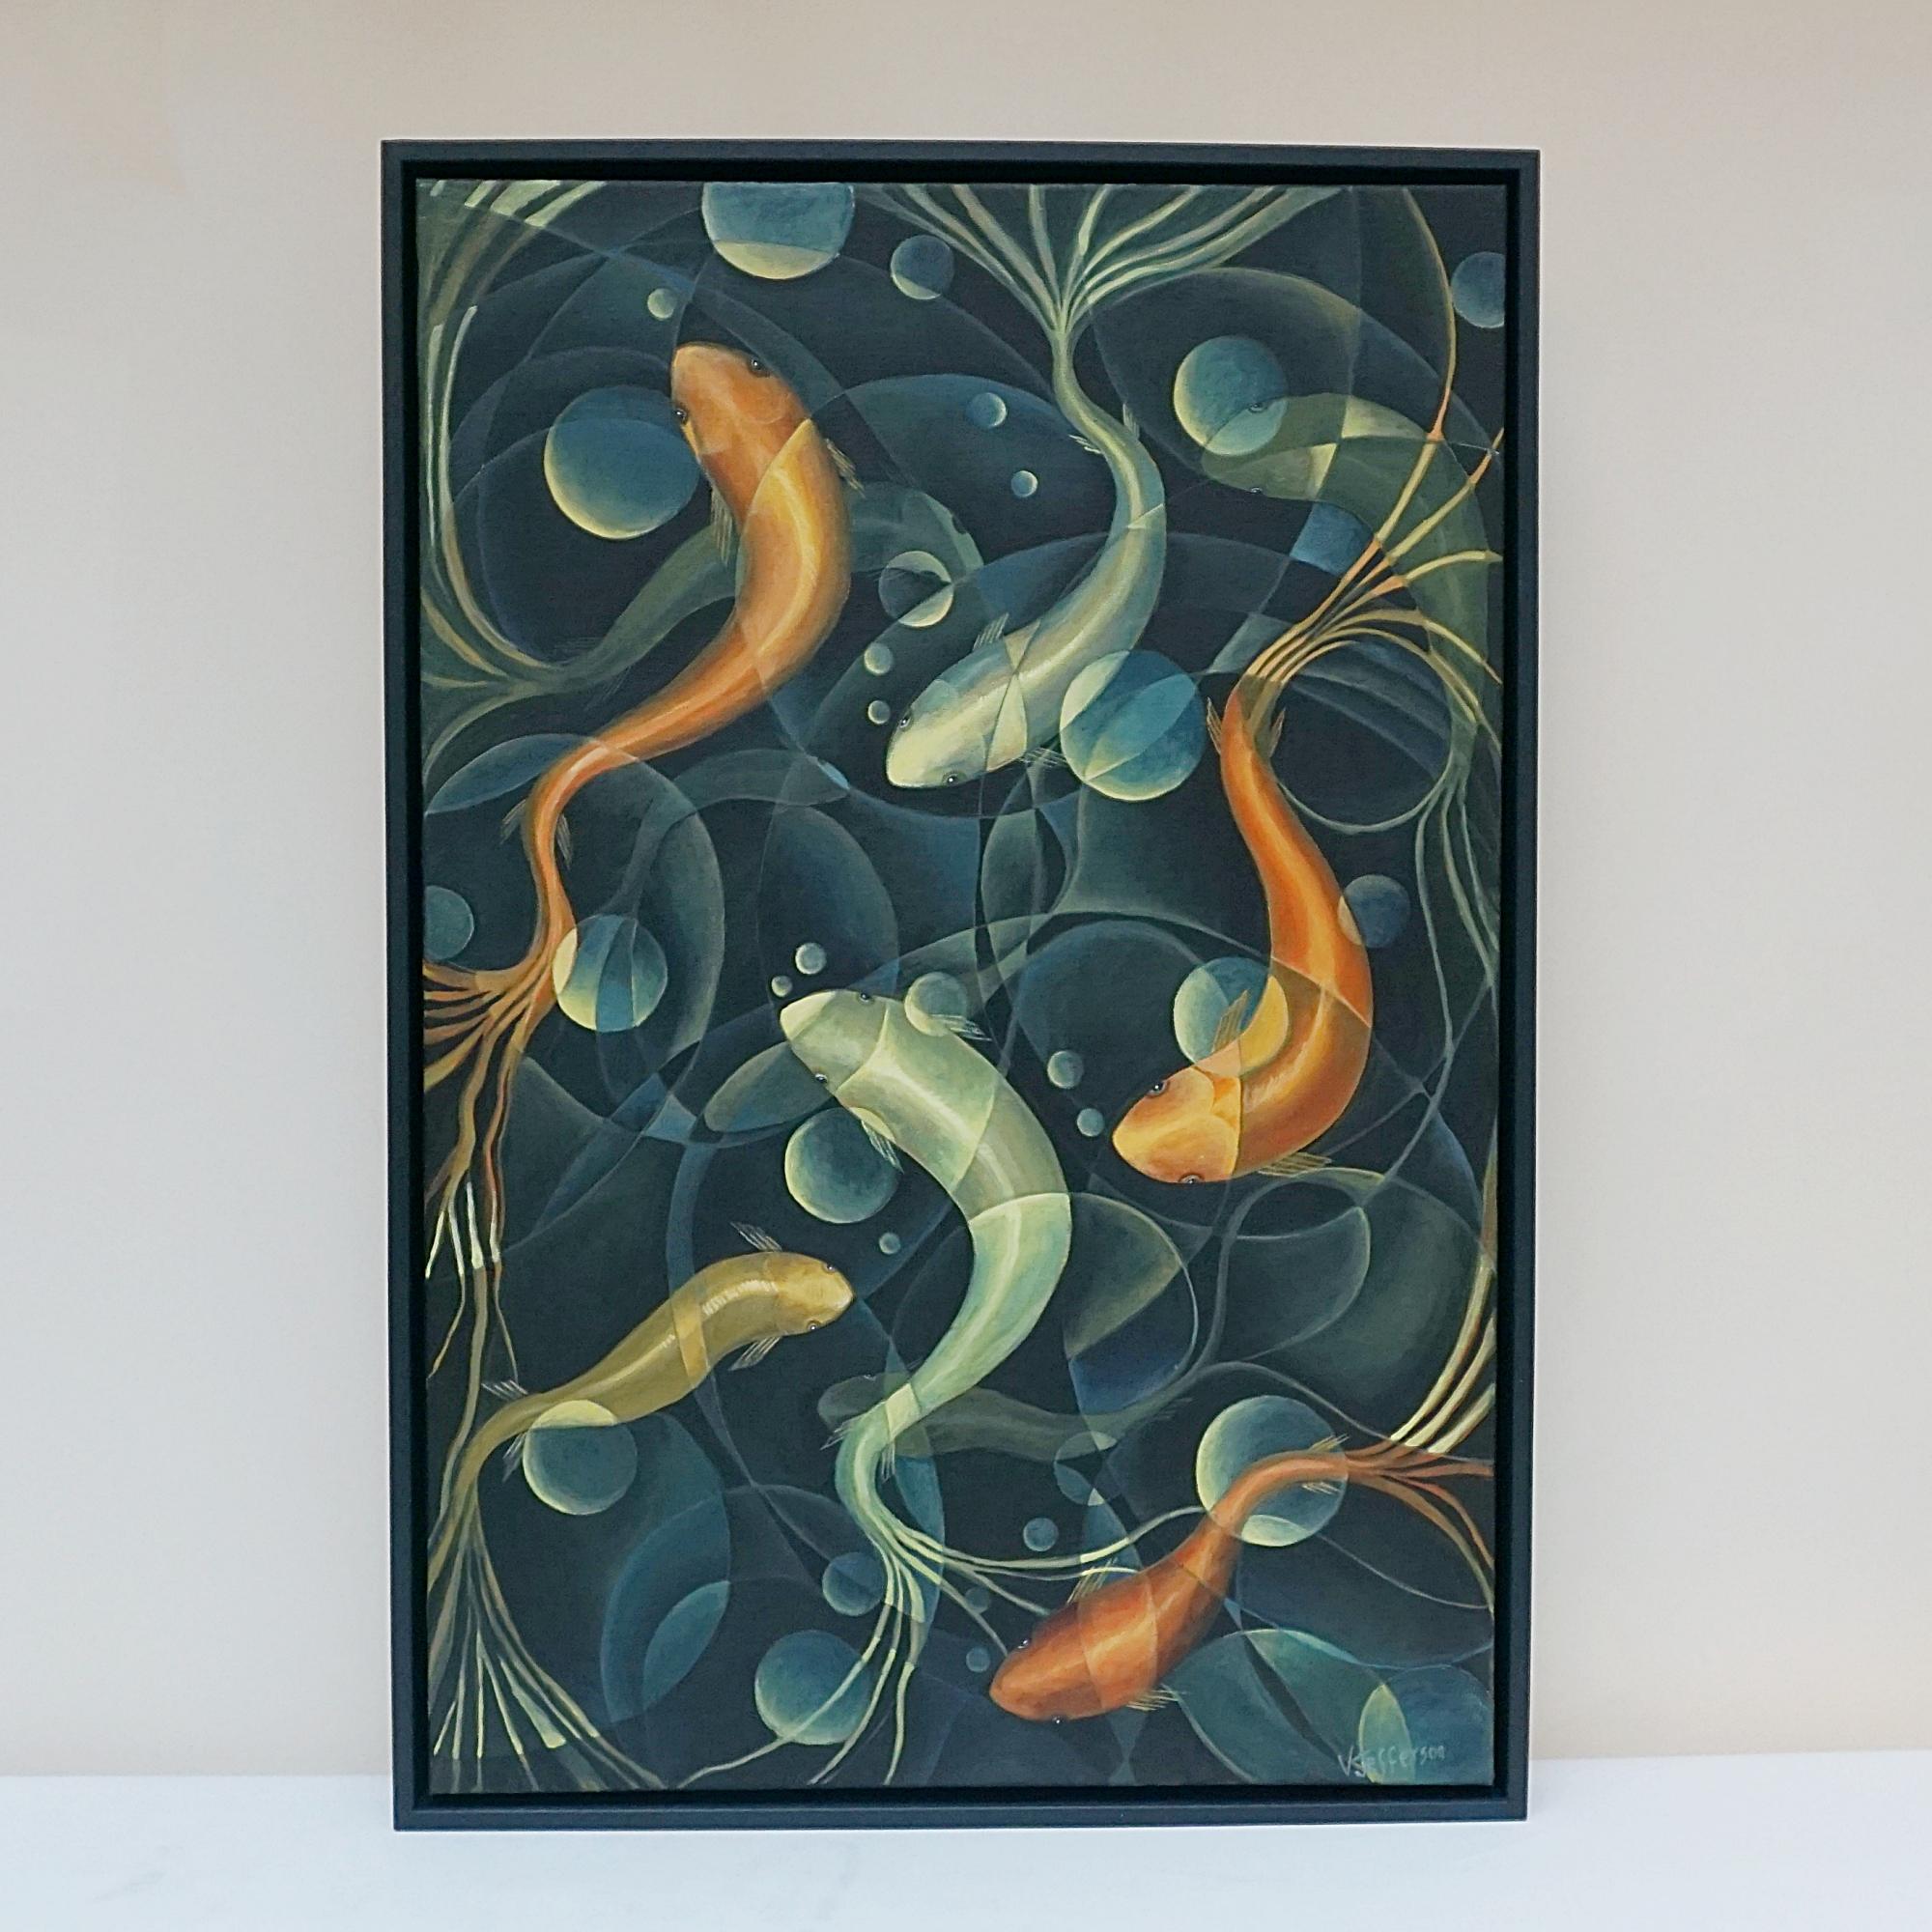 'Gazing Into The Pond' An Art Deco Style Contemporary painting by Vera Jefferson depicting swirling goldfish against a blue, stylised, abstract background. Signed V Jefferson to lower right. 

Dimensions: H 93cm W 63.5 D 5cm

 Vera Jefferson trained